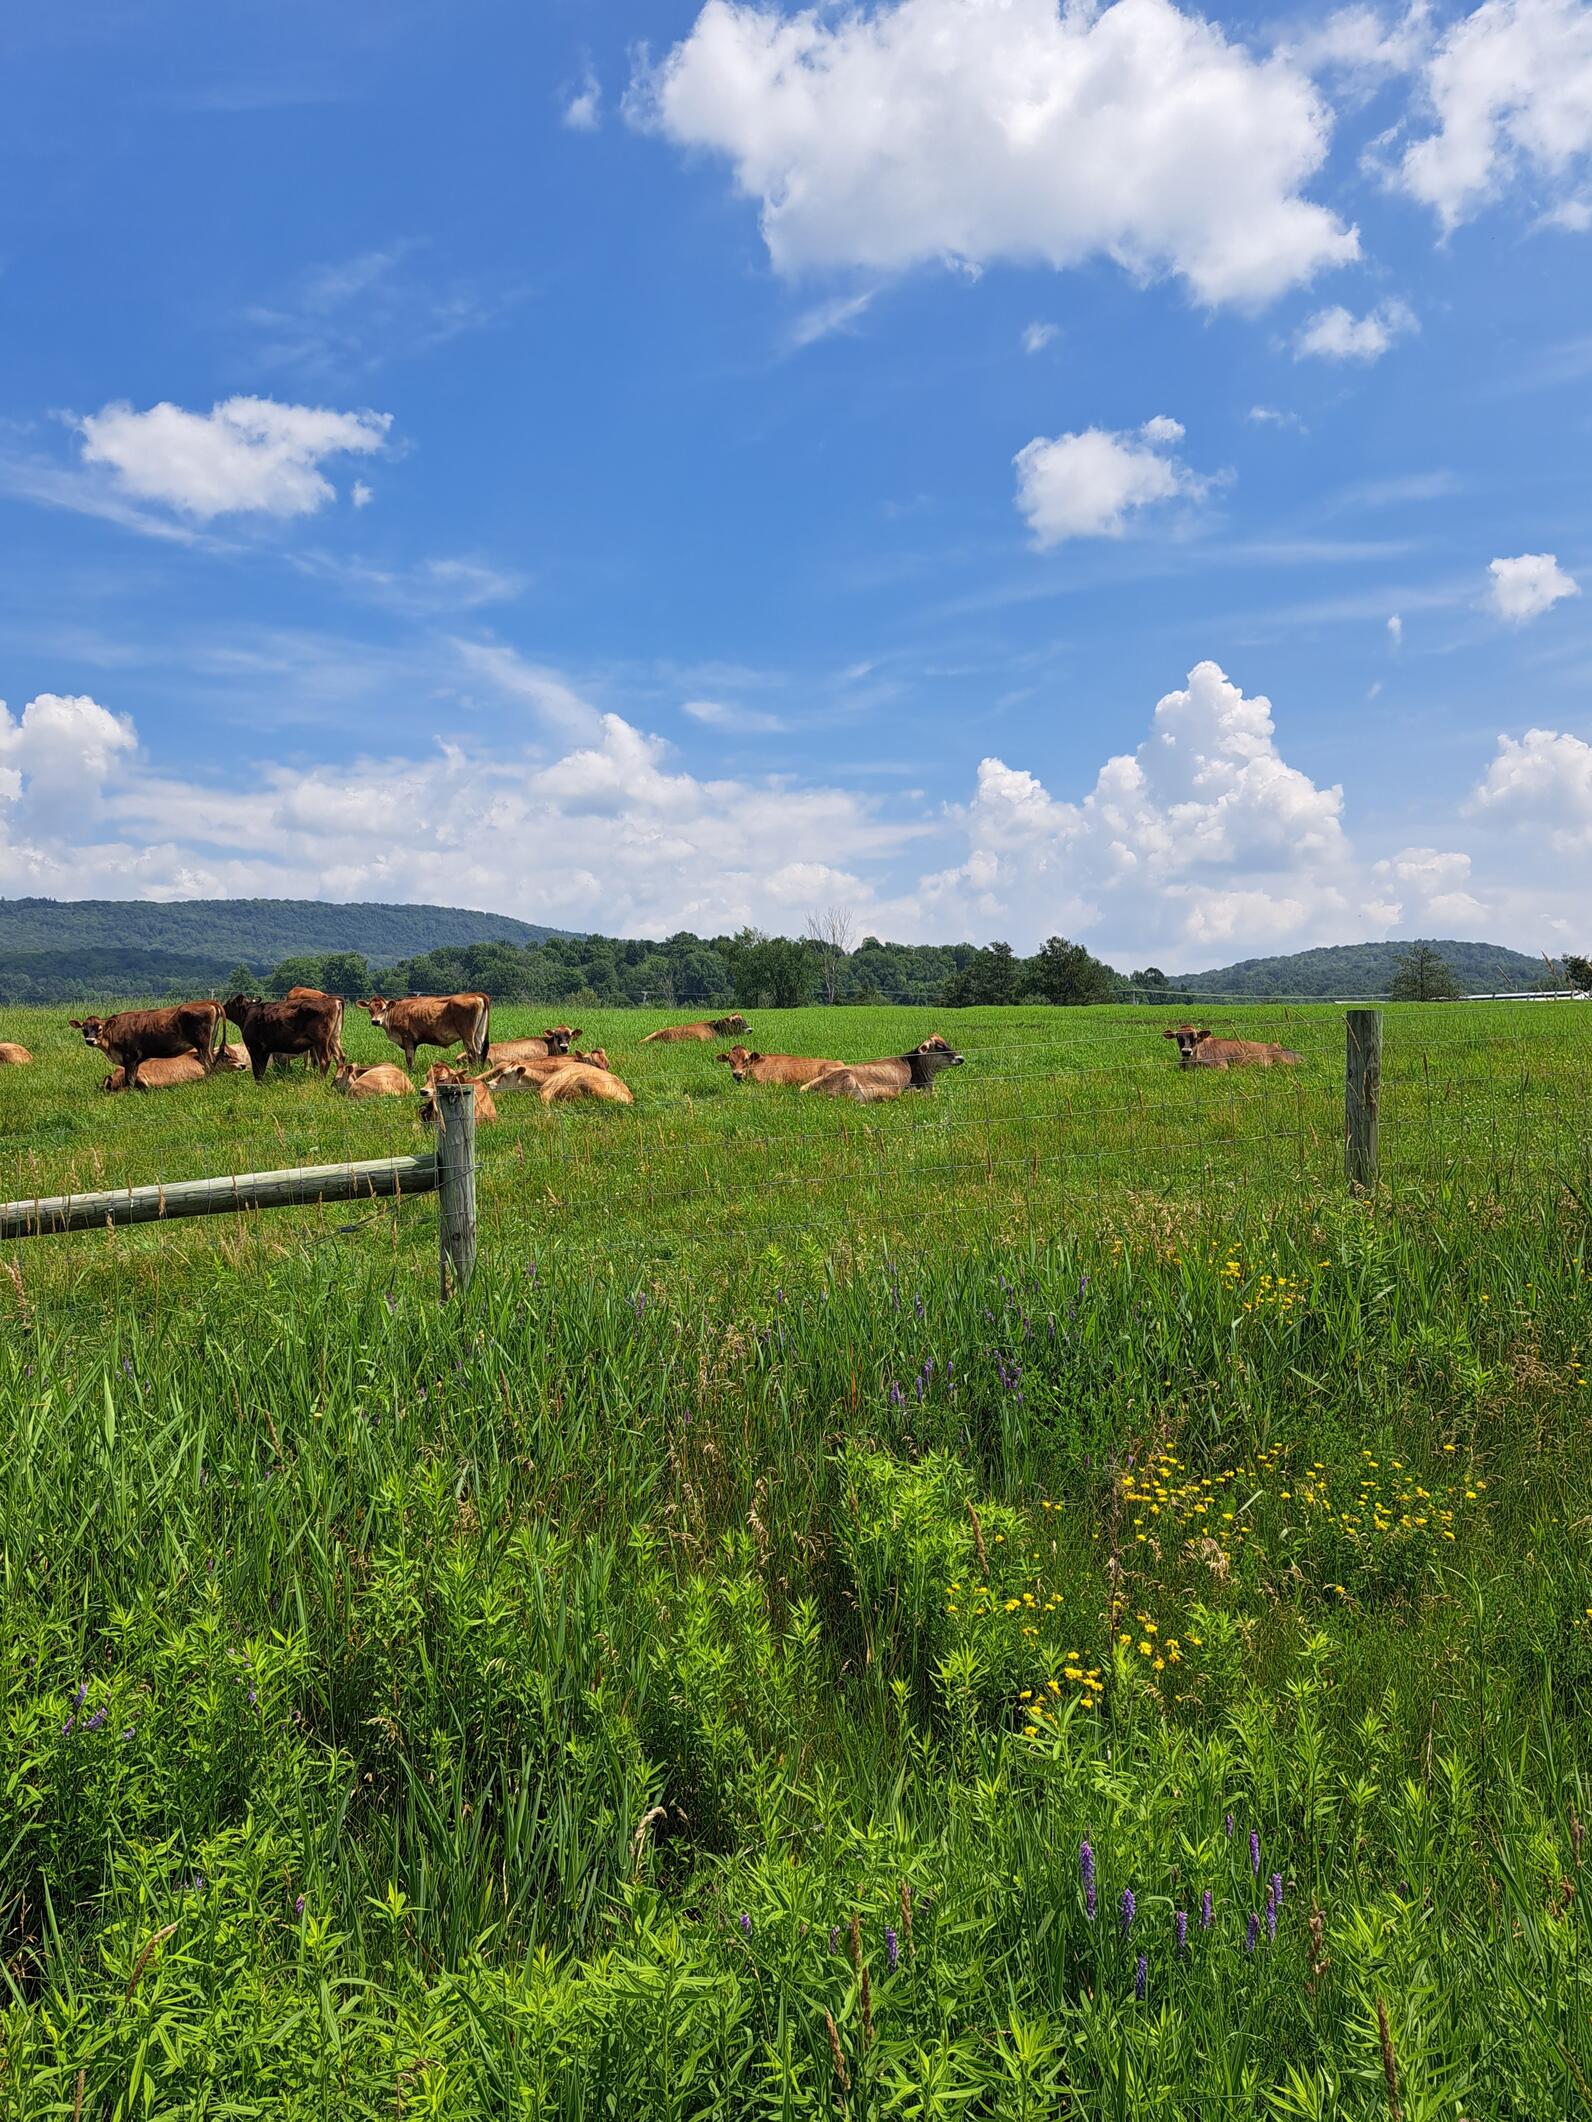 field of grazing dairy cows within a fence and surrounded by tall grasses and herbaceous plants